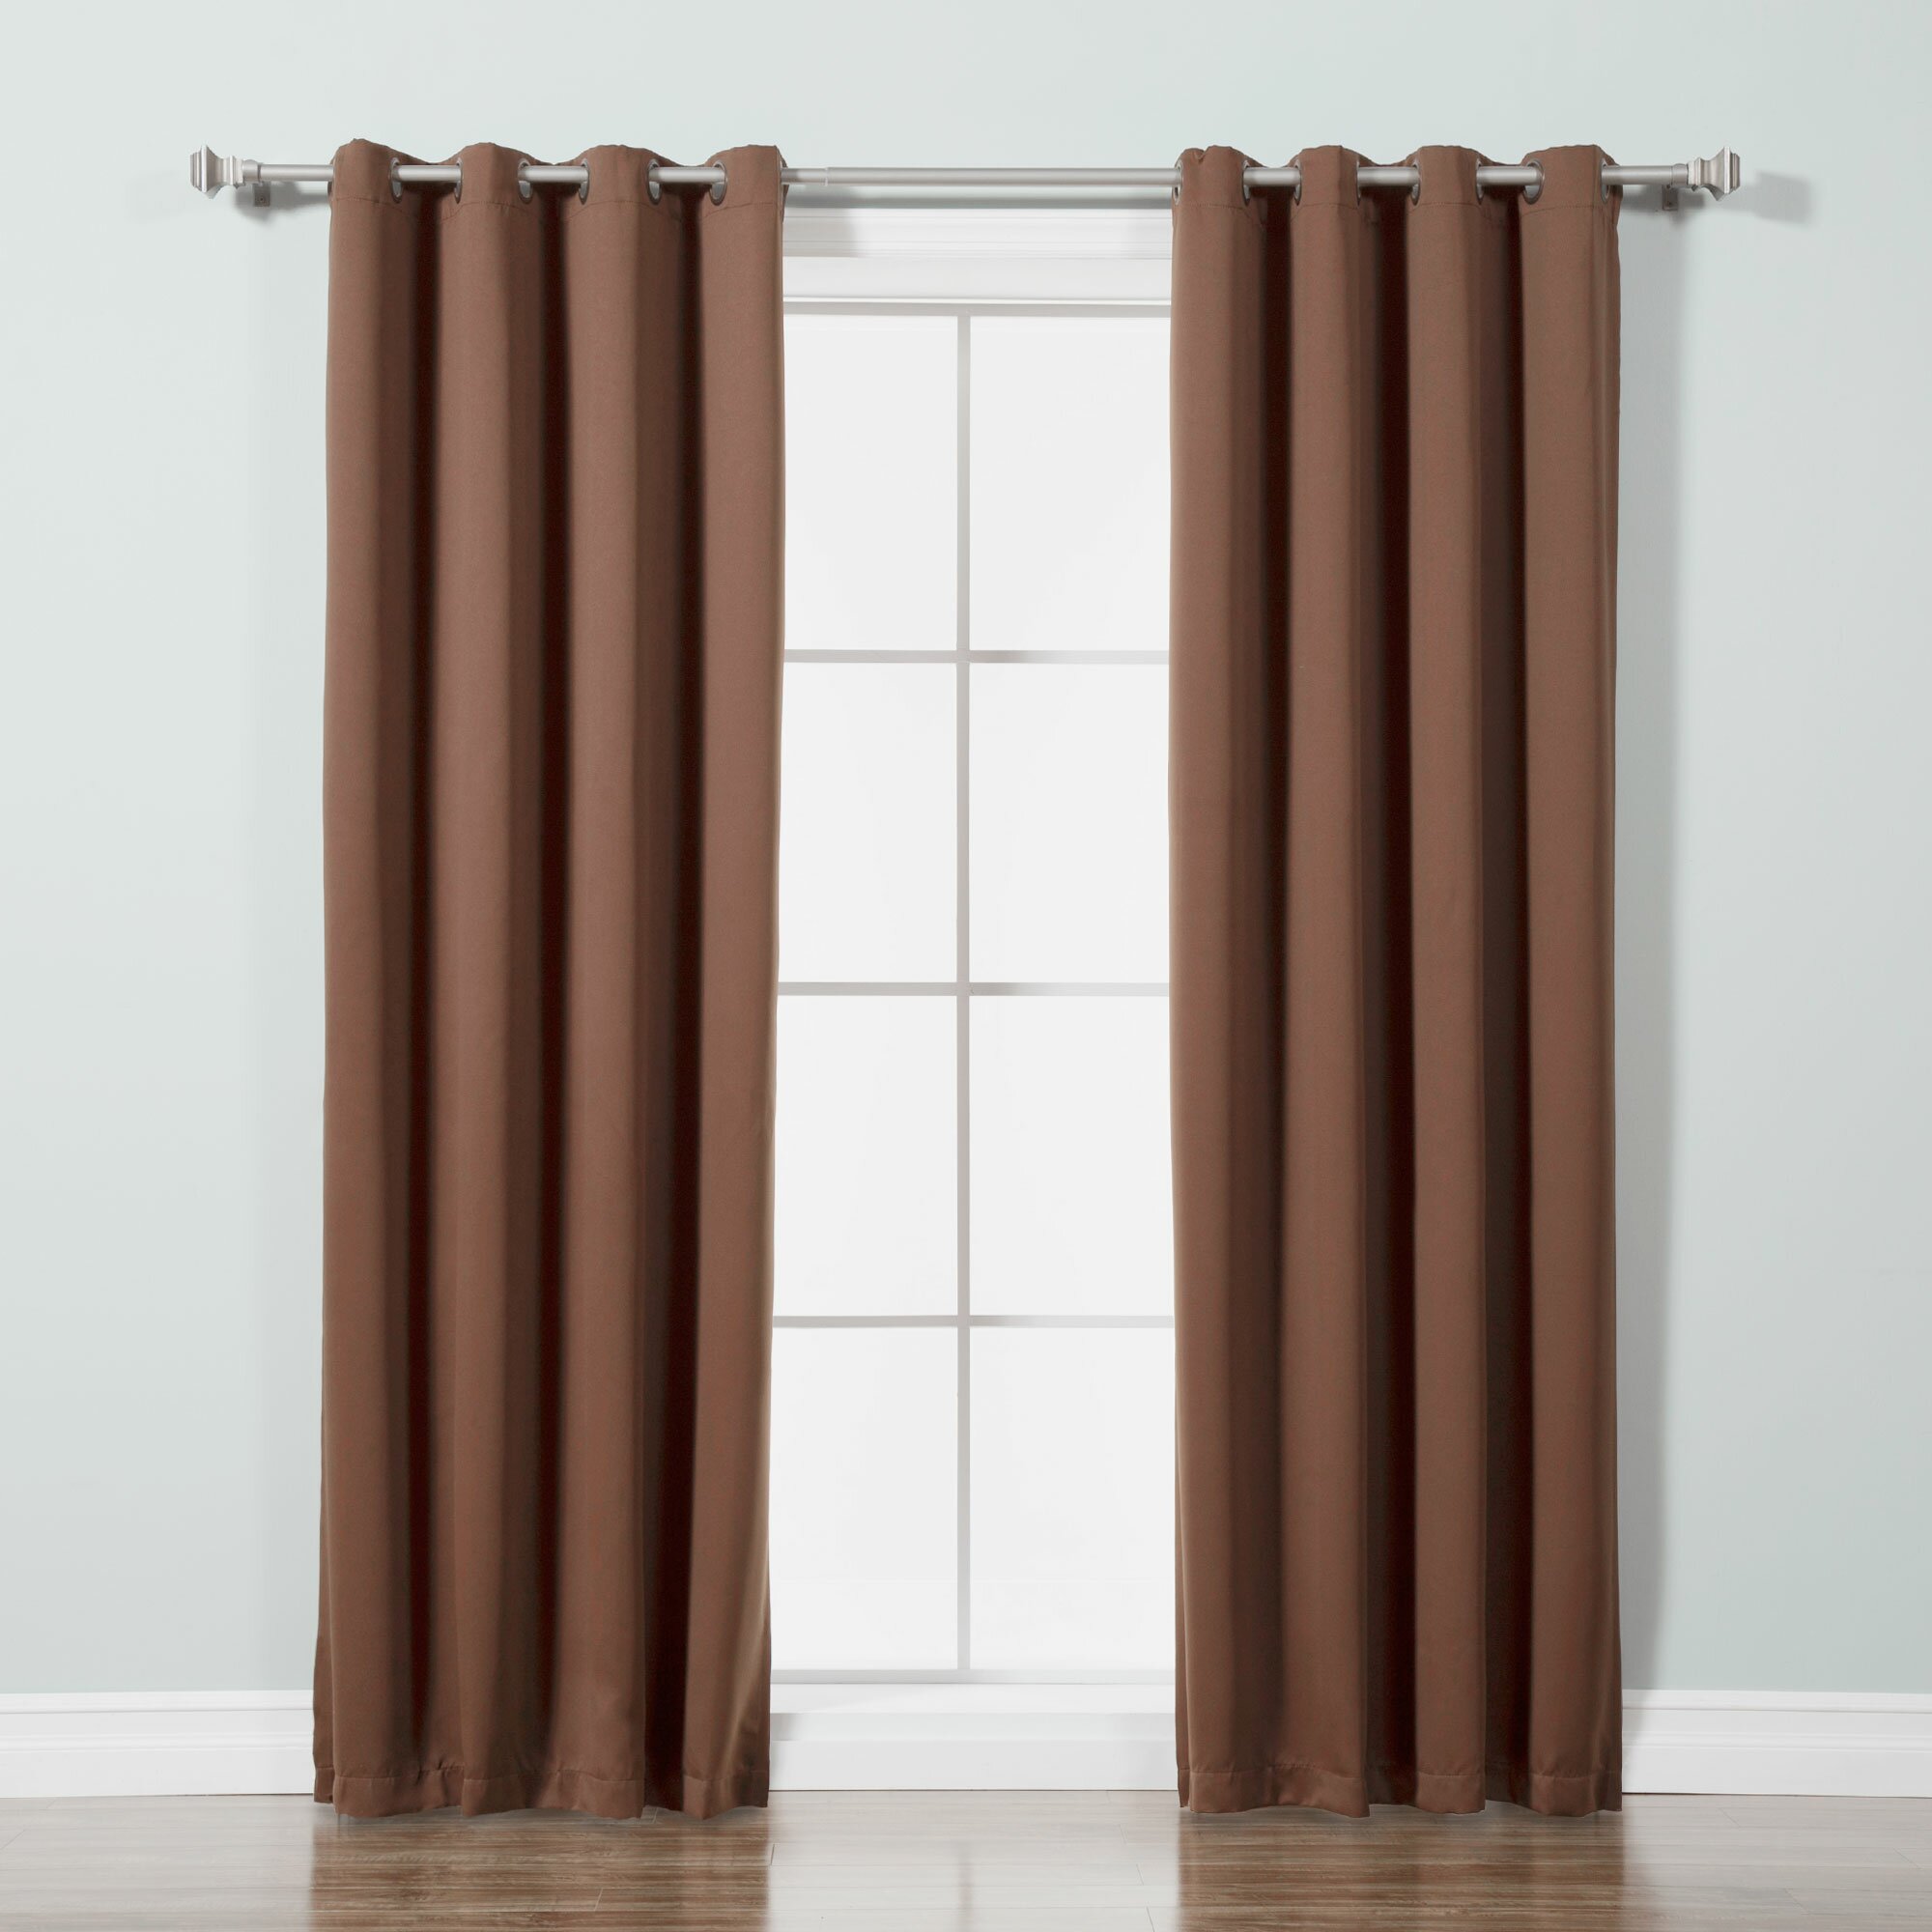 Best Home Fashion, Inc. Basic Thermal Insulated Blackout Curtain Panel